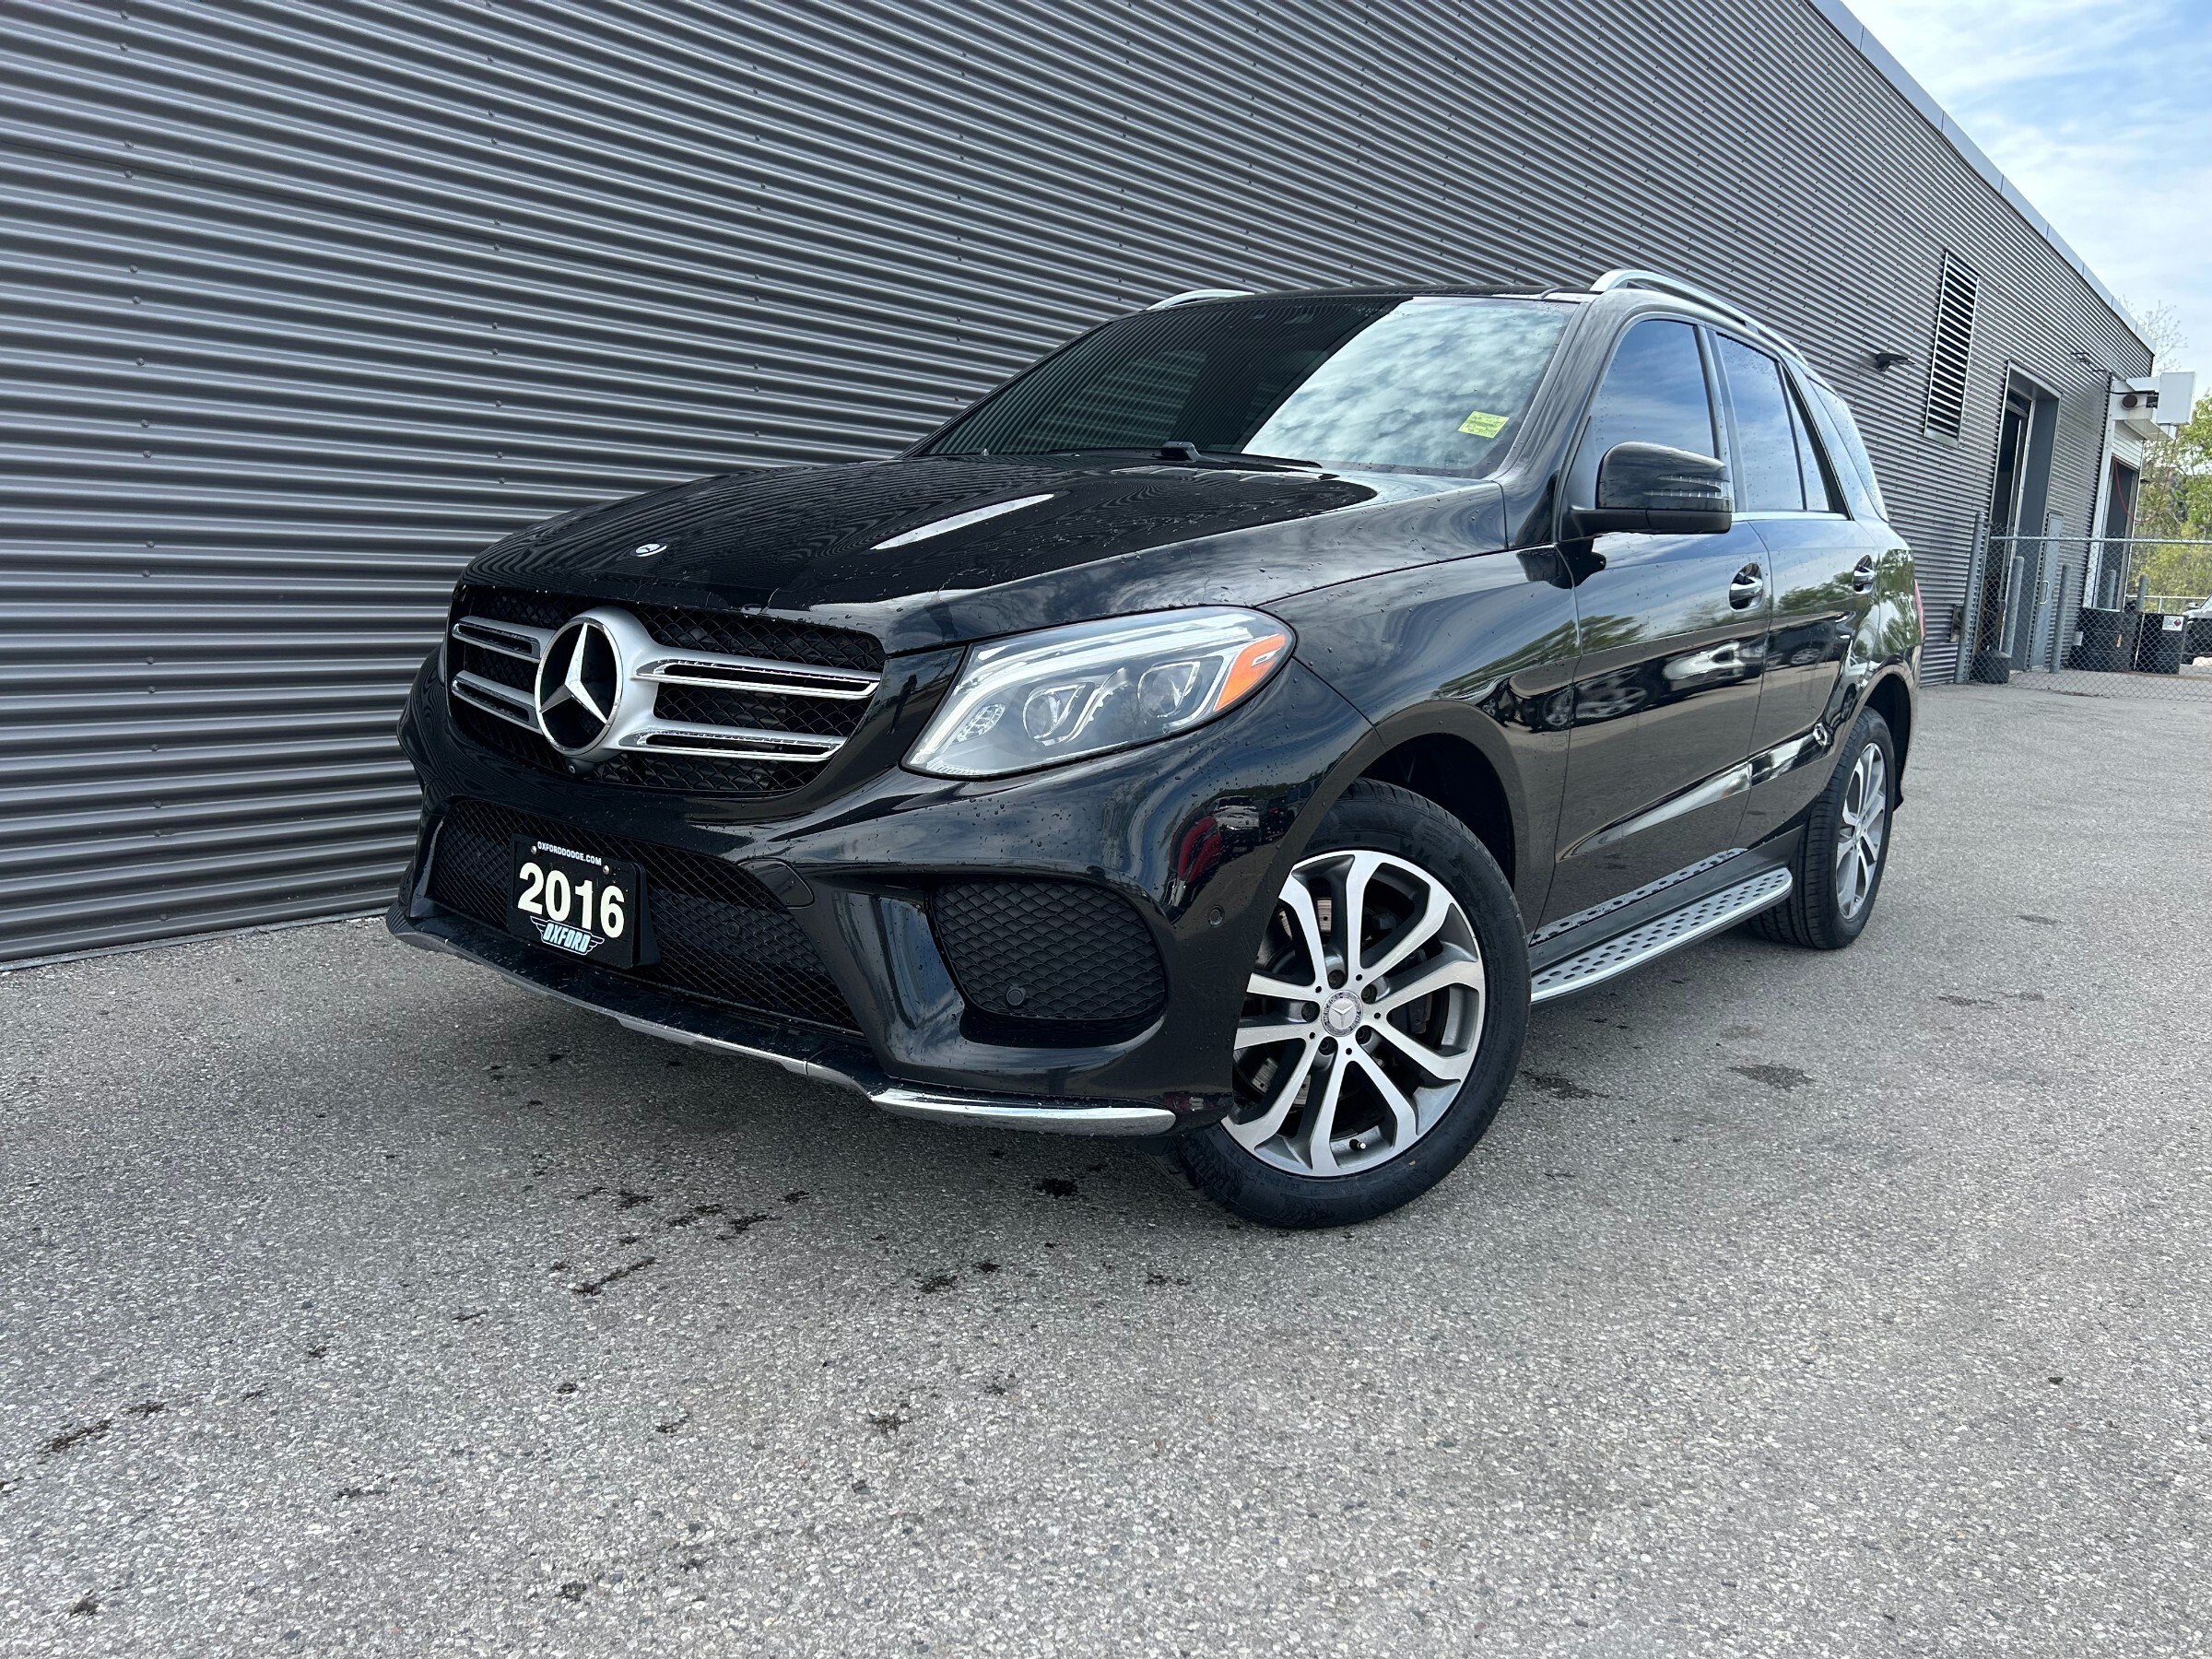 2016 Mercedes-Benz GLE-Class Clean Carfax, Two Sets Of Wheels And Tires, Afford